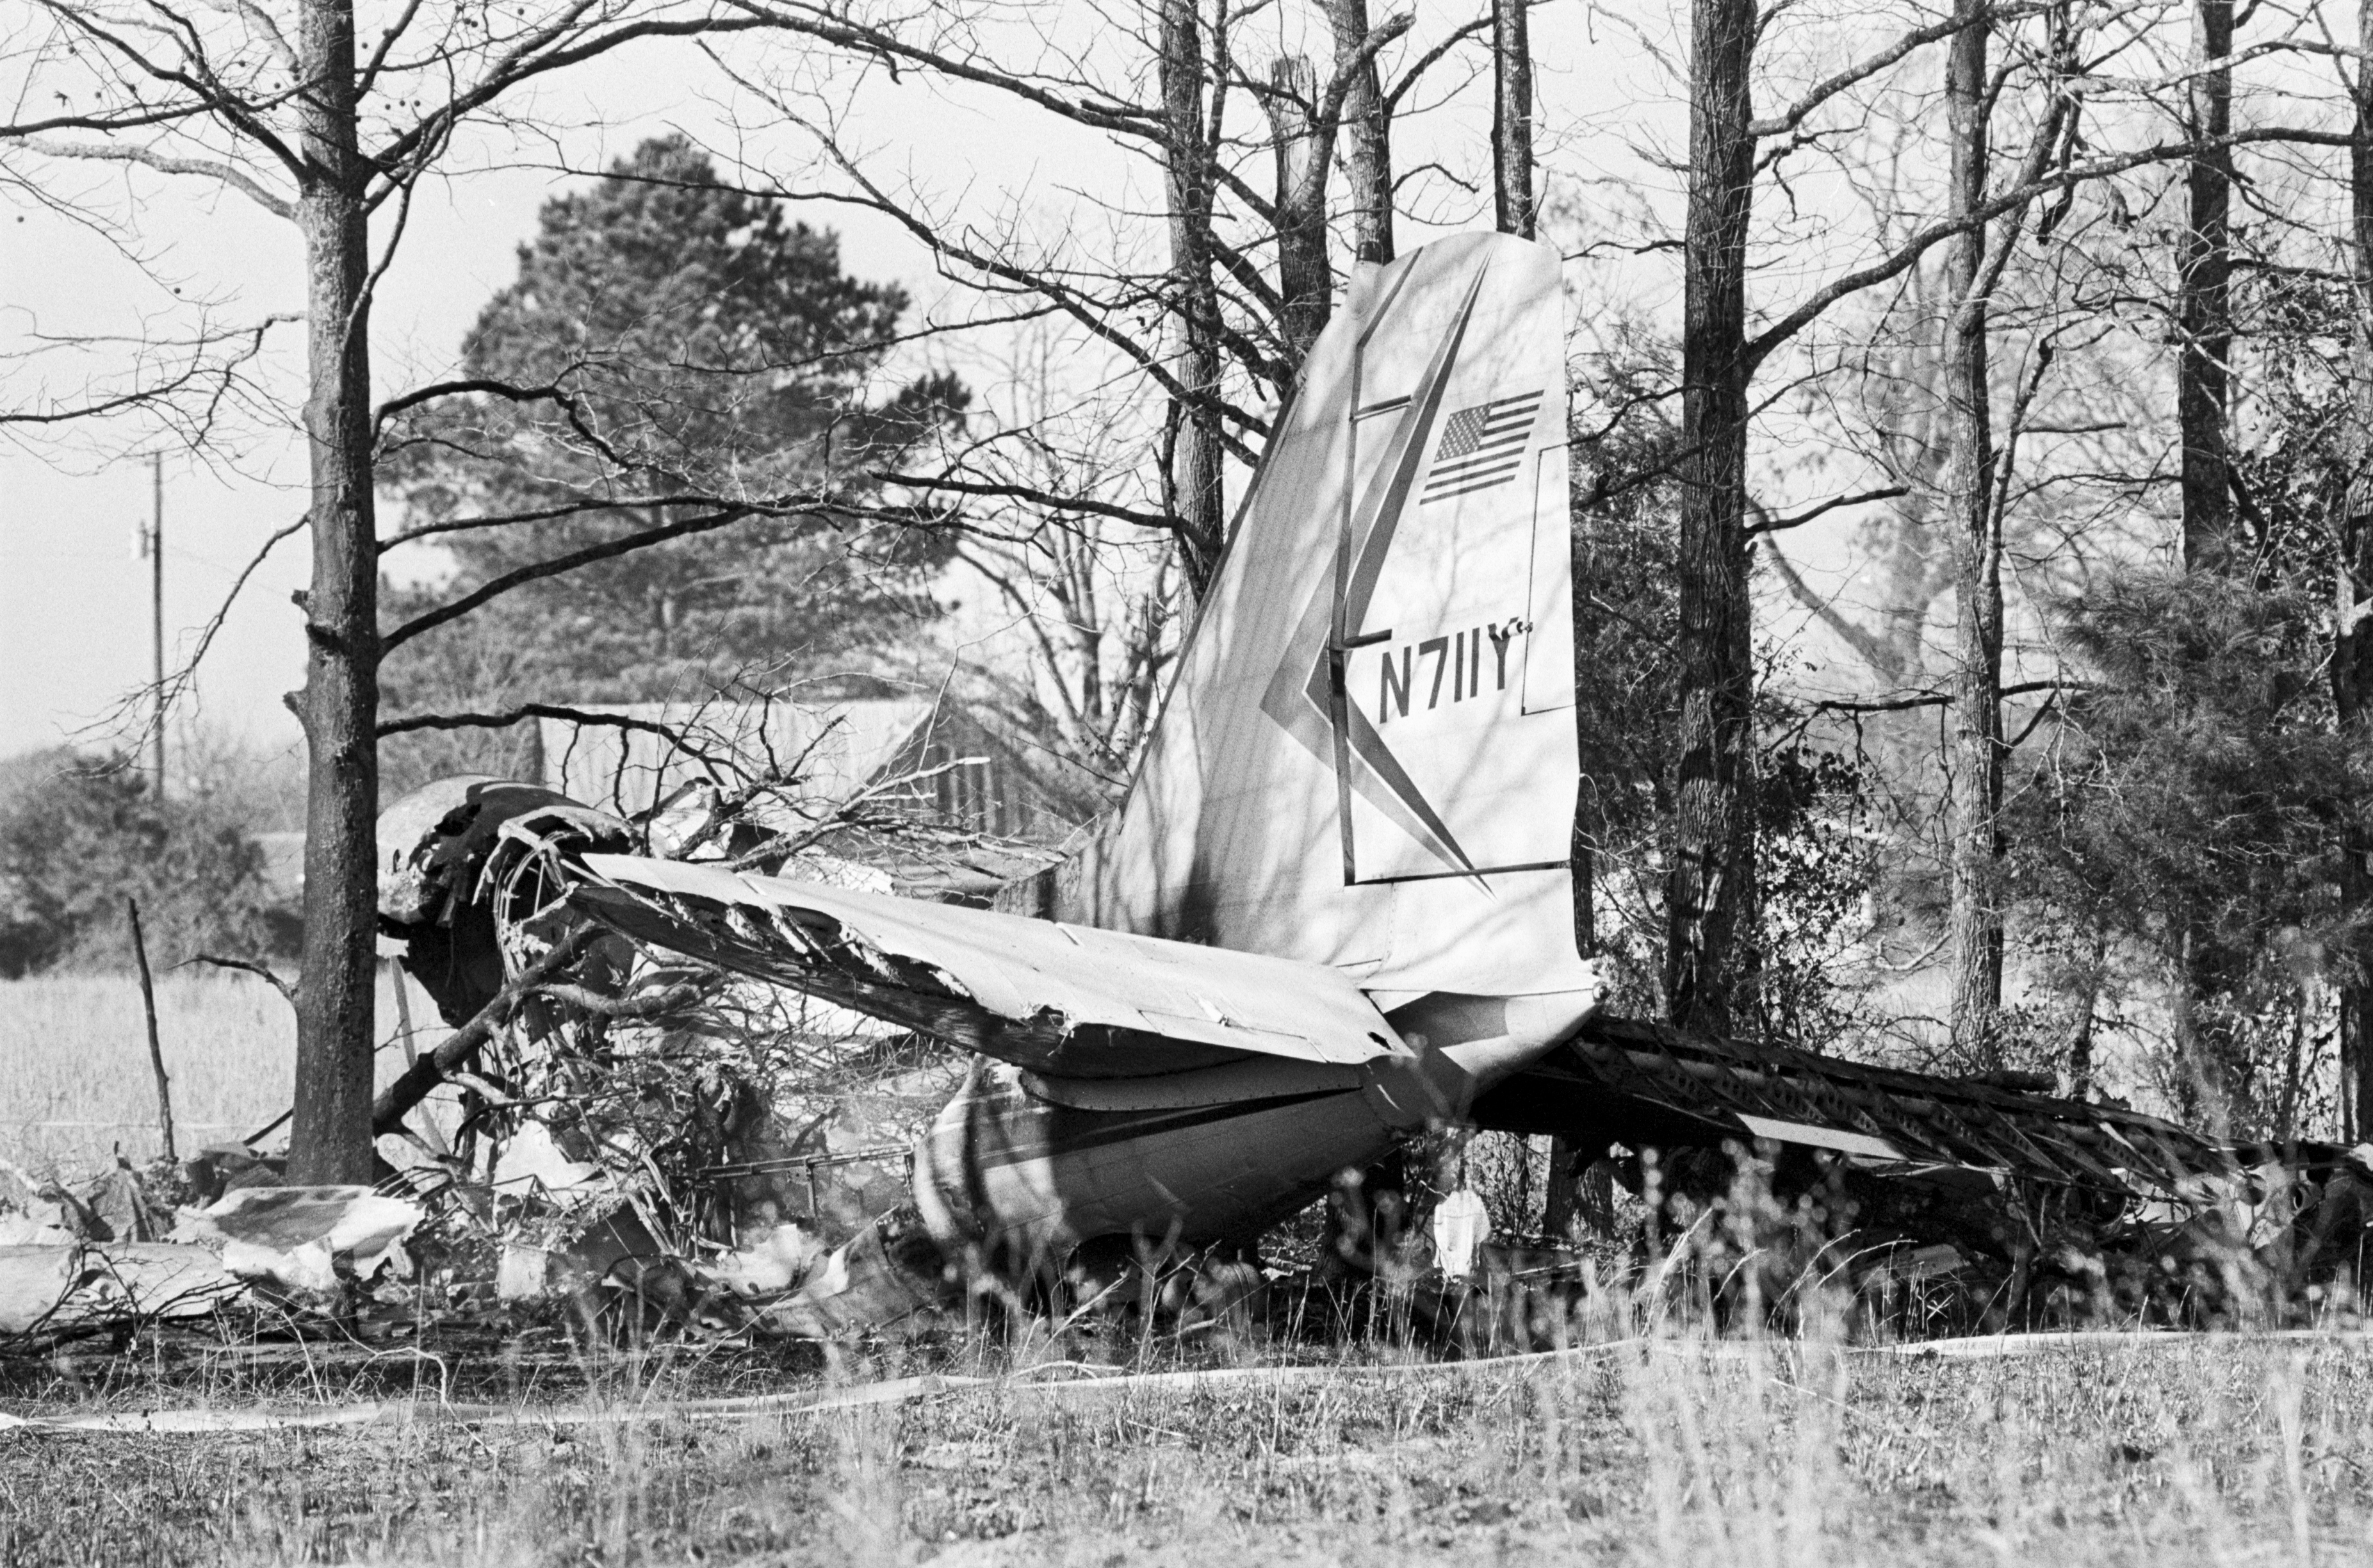 The debris of a DC-3 plane, that crashed and killed the singer | Source: Getty Images